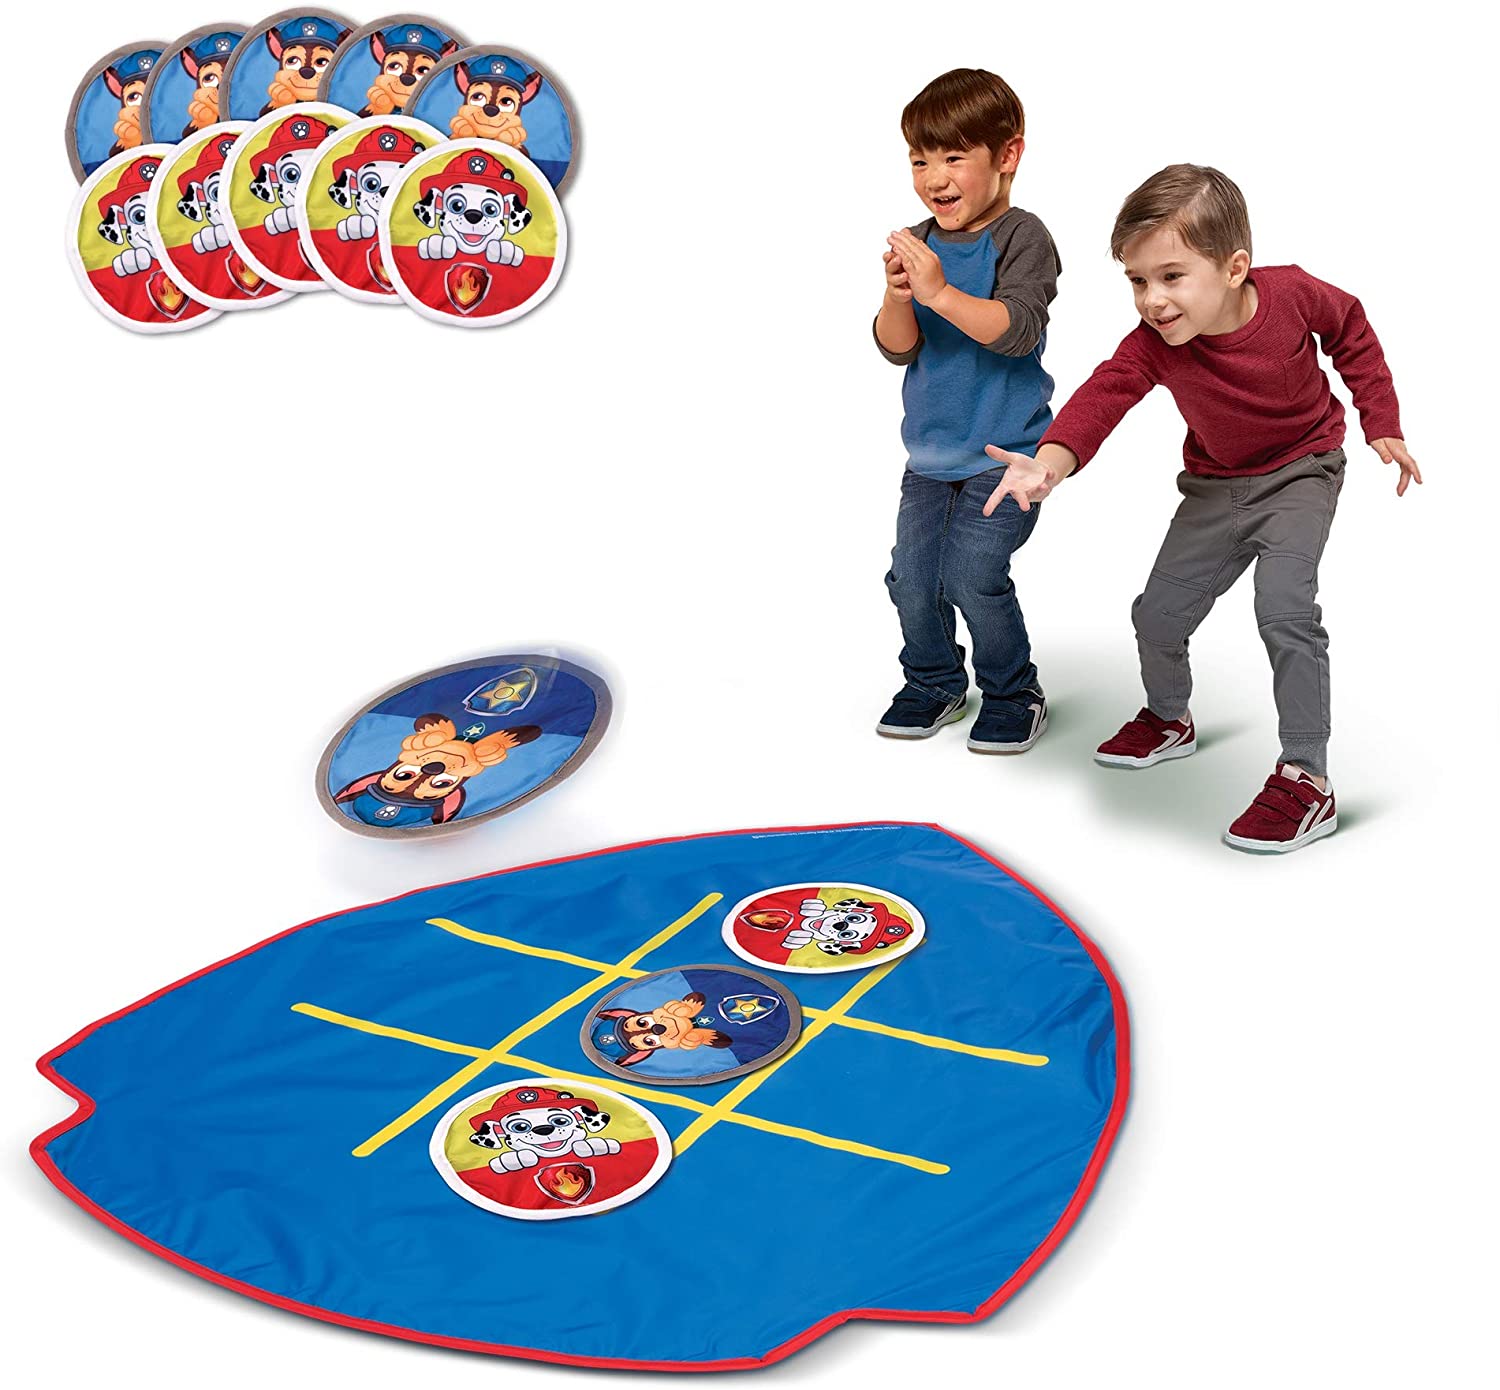 Paw Patrol Tic Tac Toss Game for Indoor & Outdoor Play $10 + Shipping is free w/ Prime or on $25+